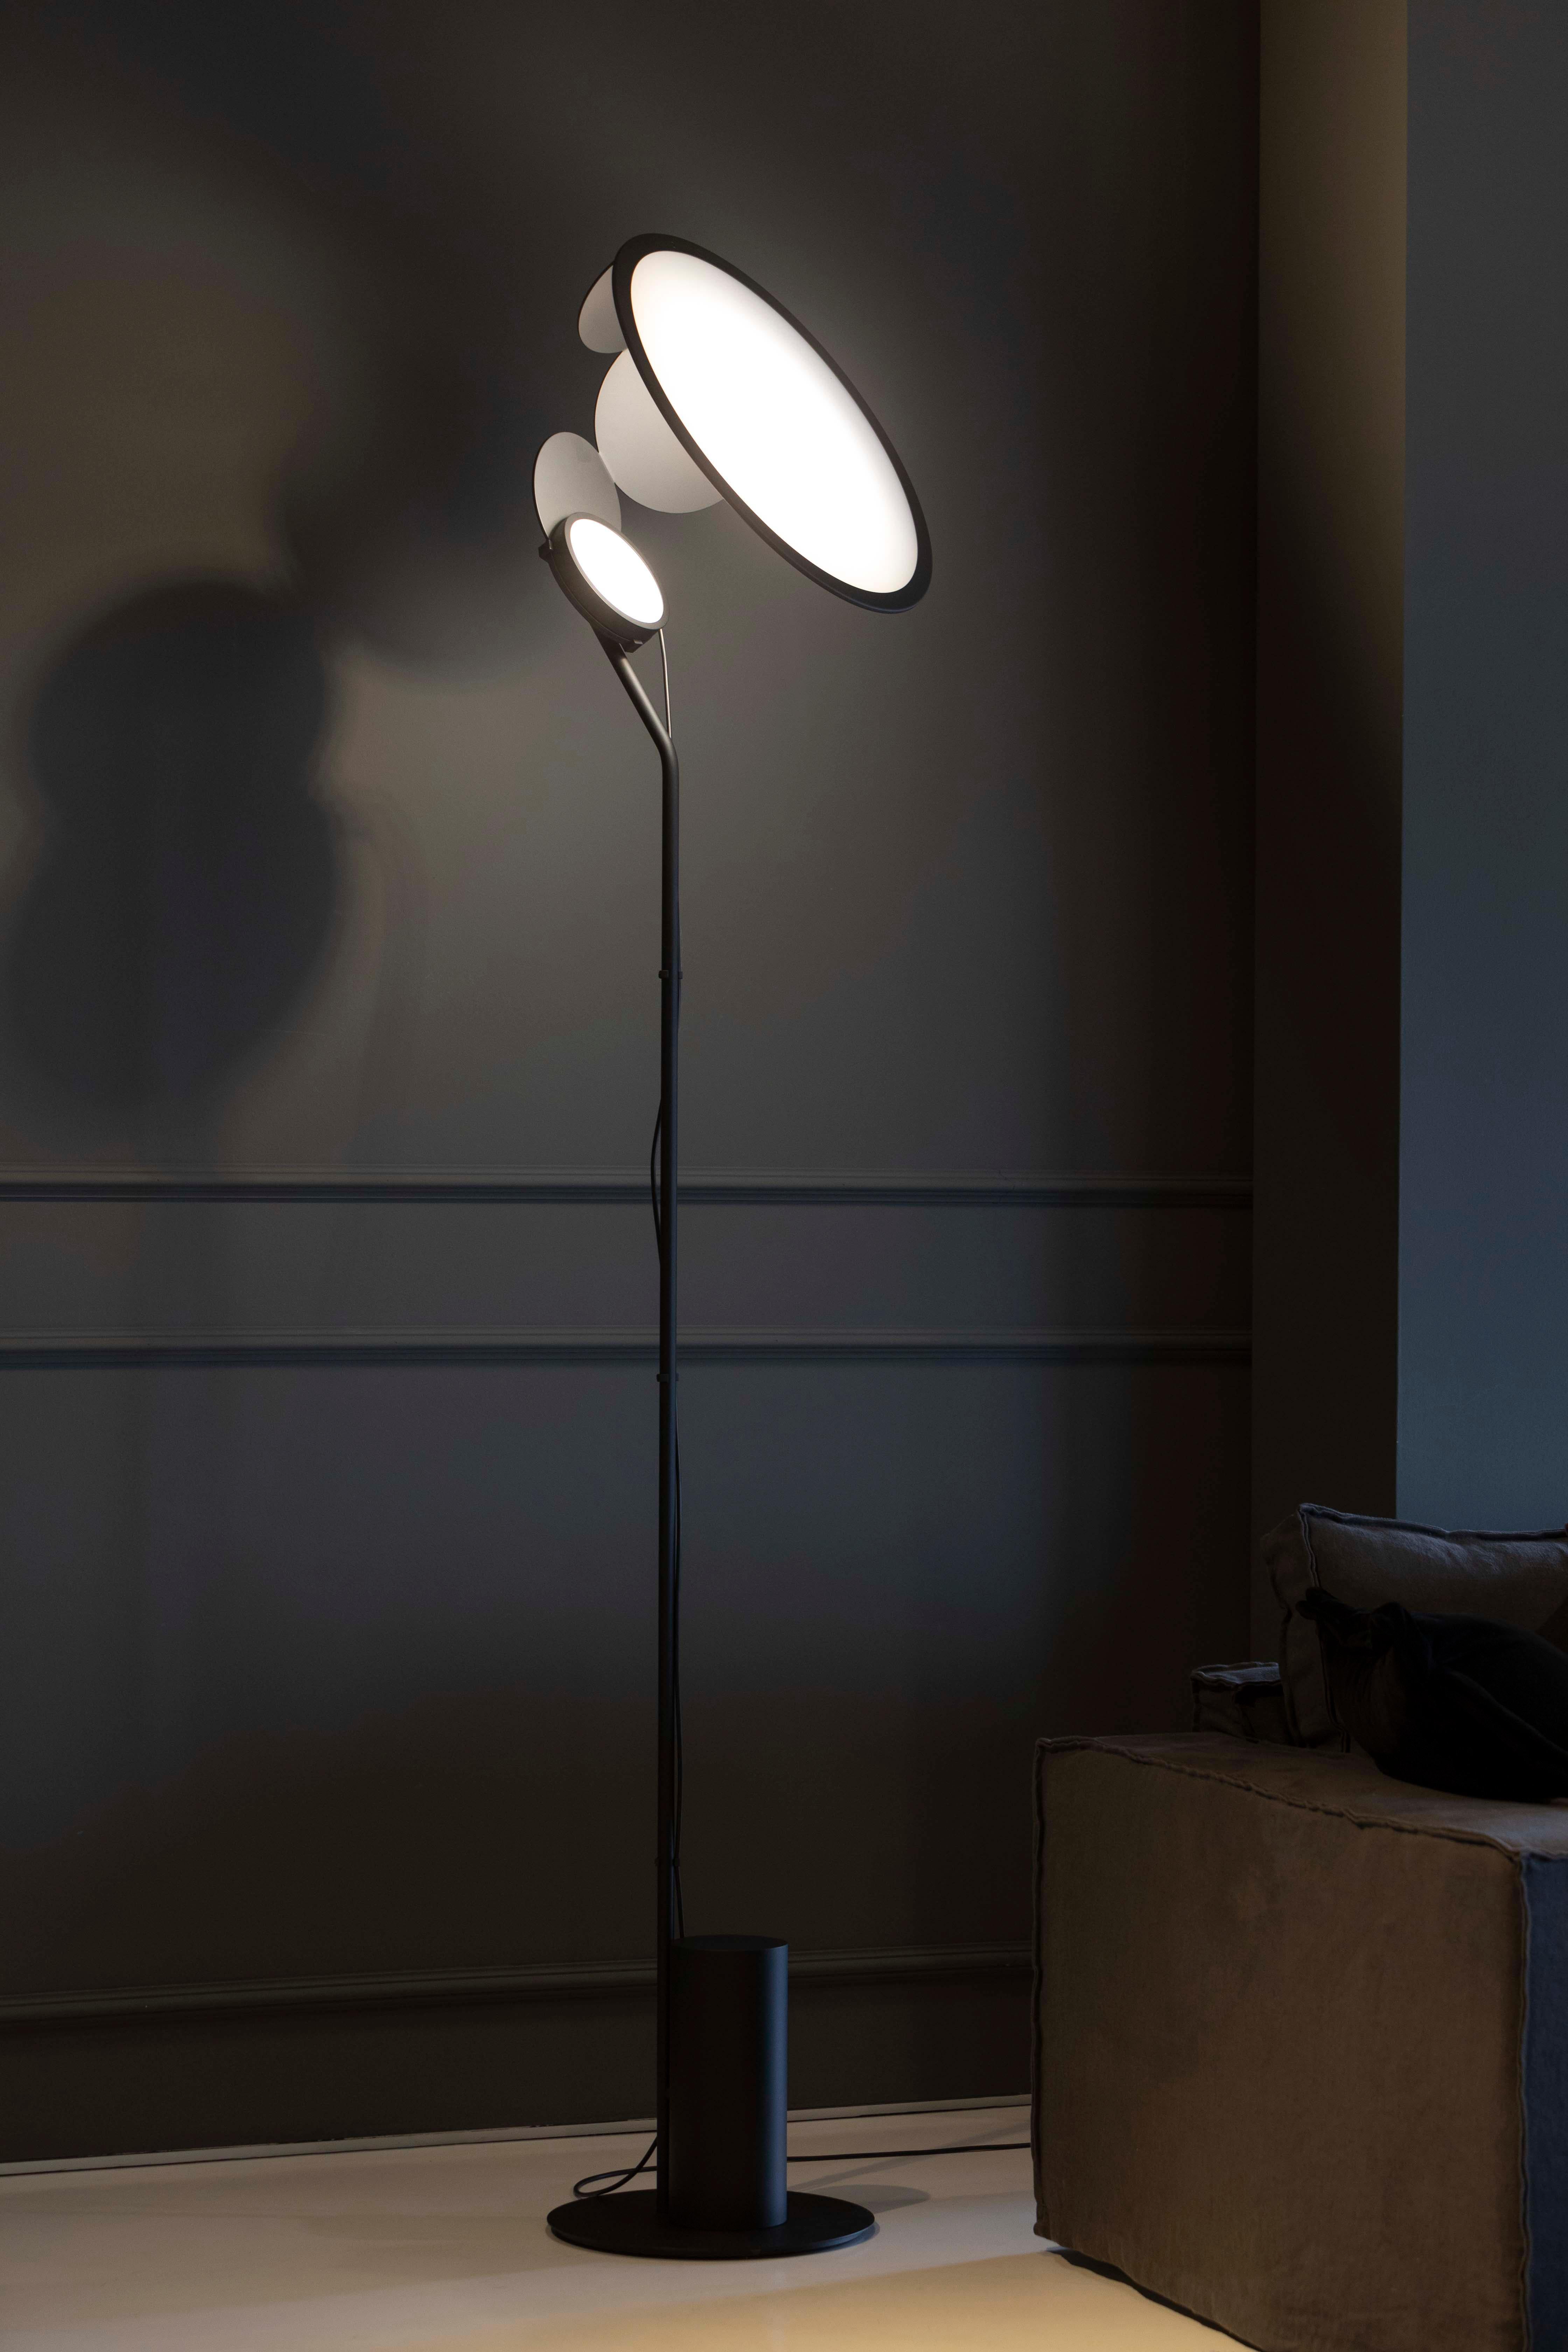 Axolight Cut Medium Floor Lamp in Intense Black by Timo Ripatti

Softness of the atmosphere and personalization of orientation. Cut expresses a refined design and an emotional light which does not dazzle, but wraps gently.

Cut is the result of a